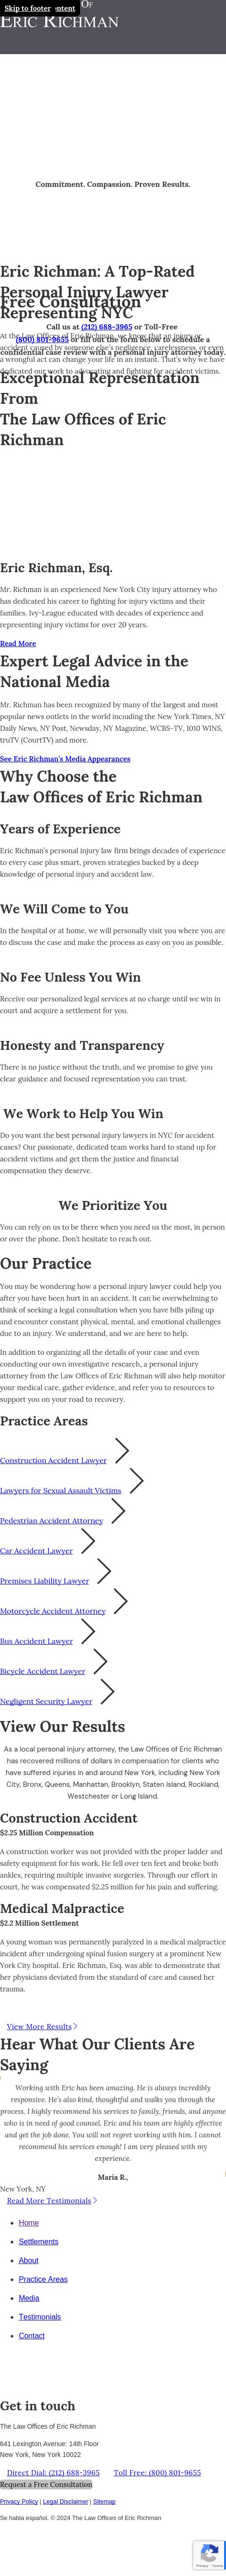 The Law Offices of Eric Richman - New York NY Lawyers